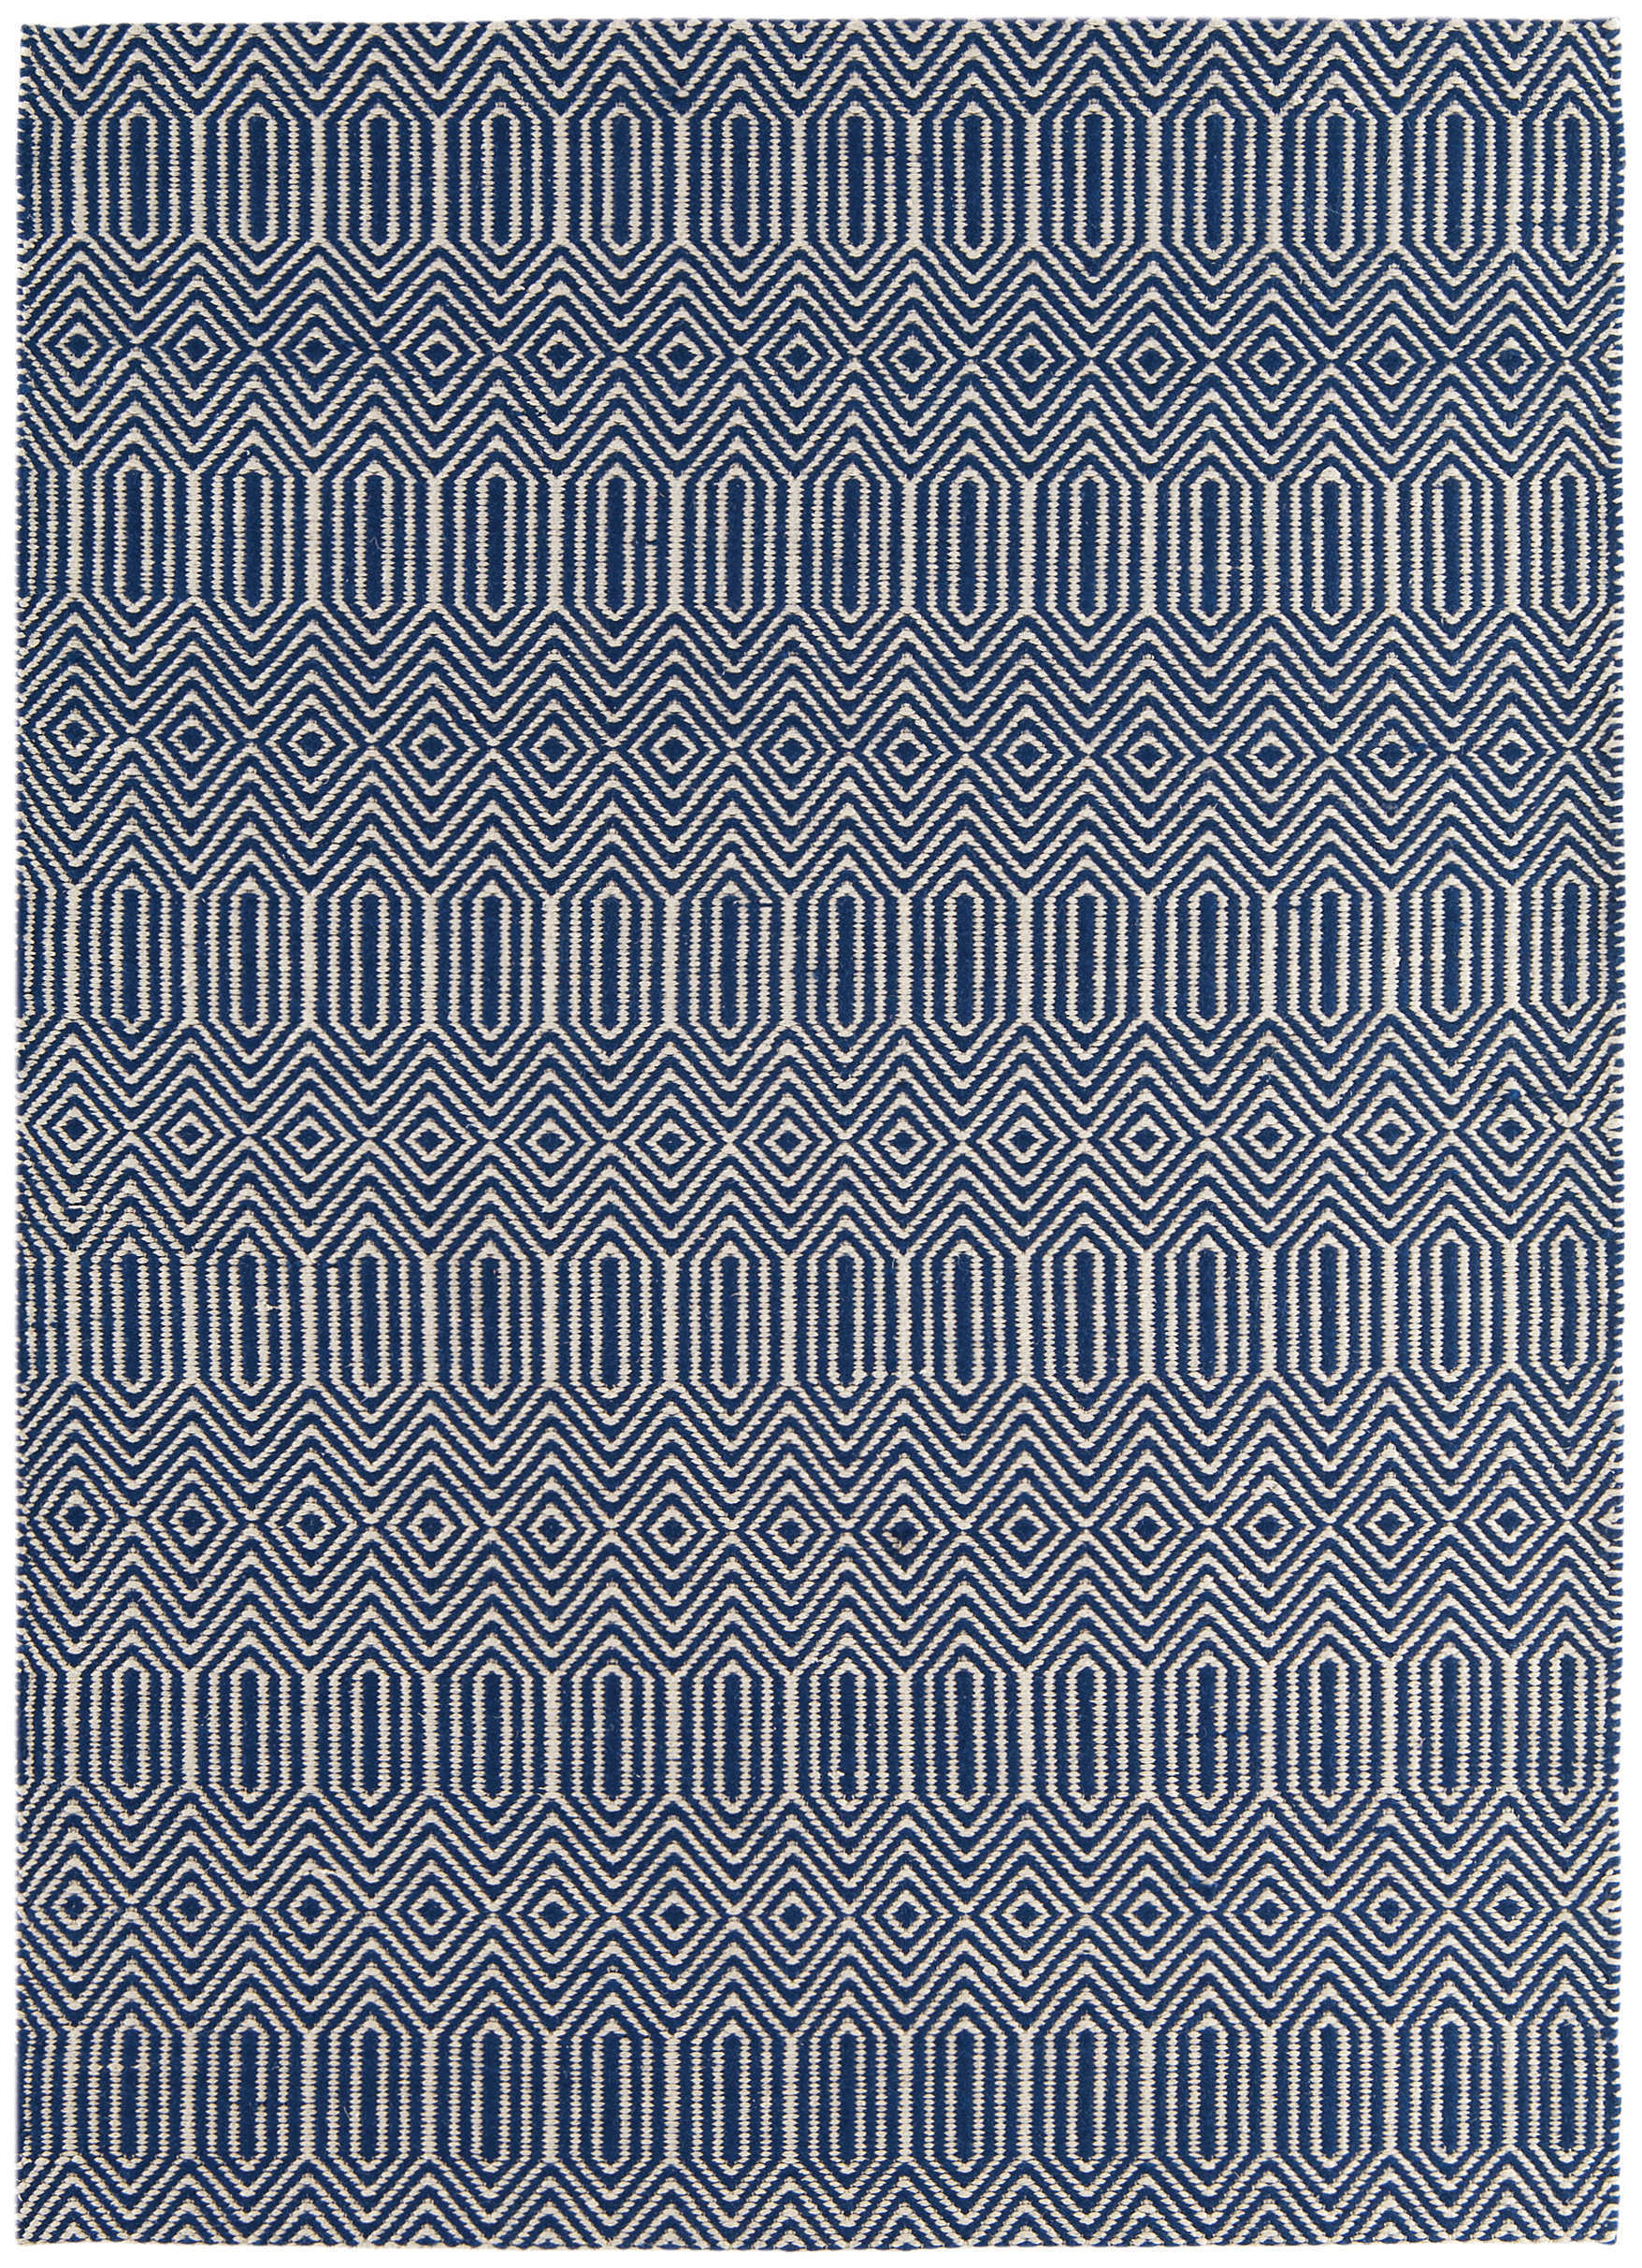 blue and white woven rug with aztec chevron pattern